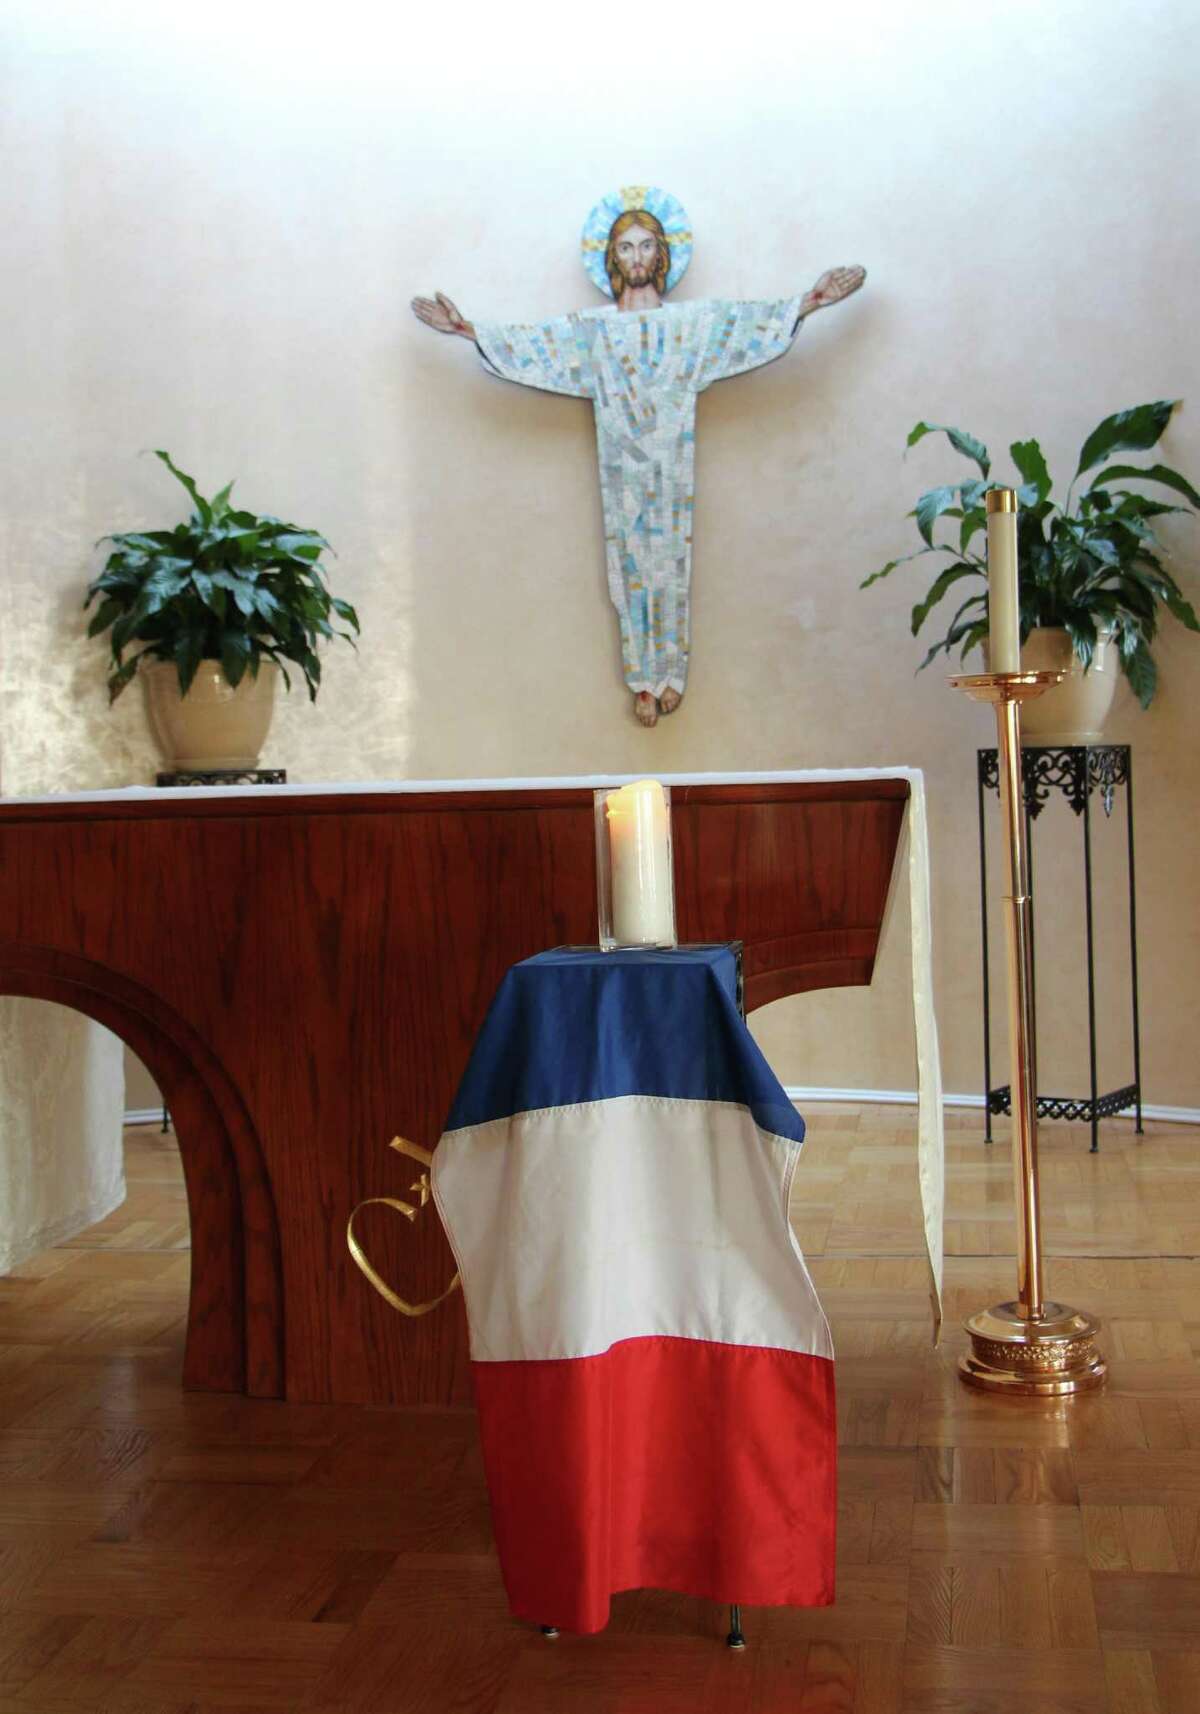 A French flag and special candle were placed Monday in the chapel at Convent of the Sacred Heart to show support for France after the Nov. 13 terrorist attacks in Paris.